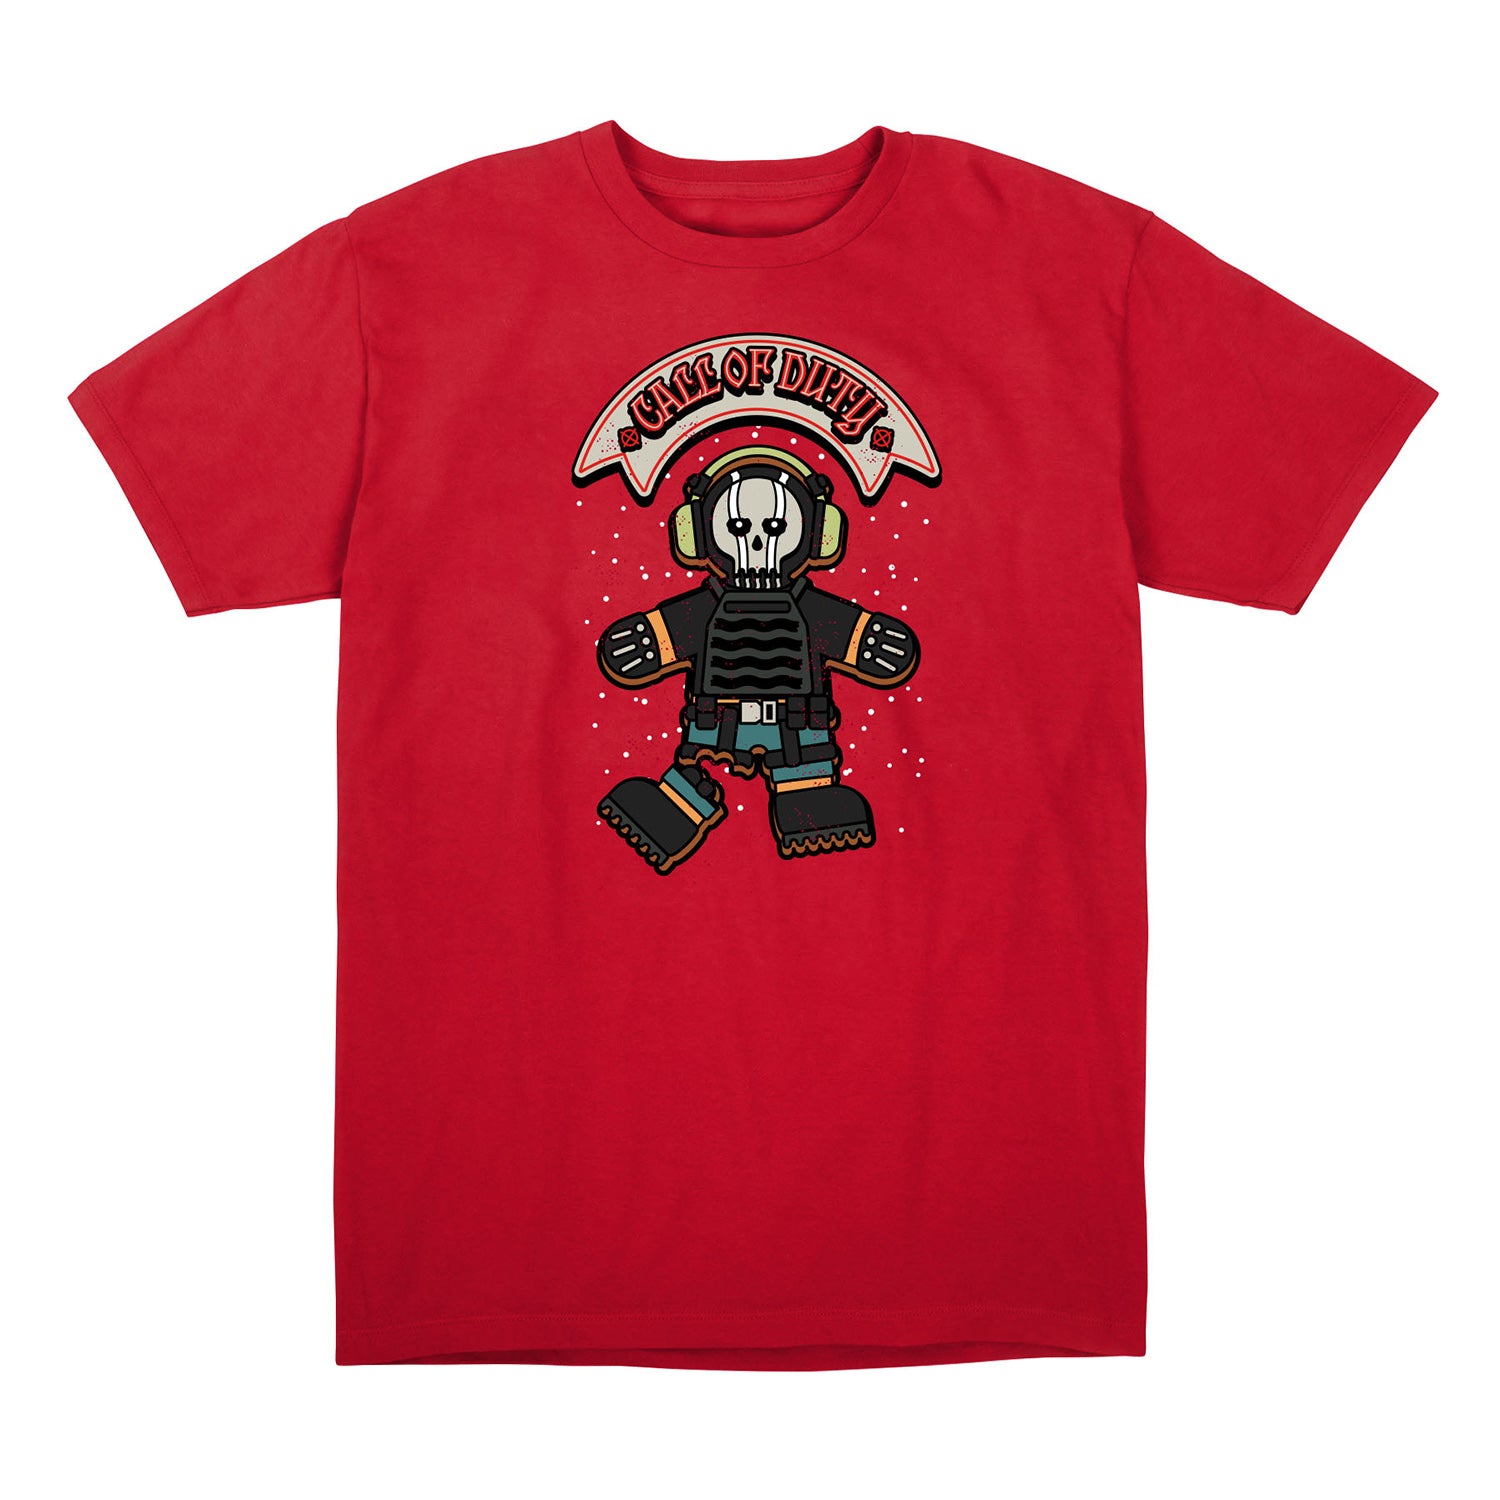 Call of Duty Gingerbread Man Red T-shirt - Front View